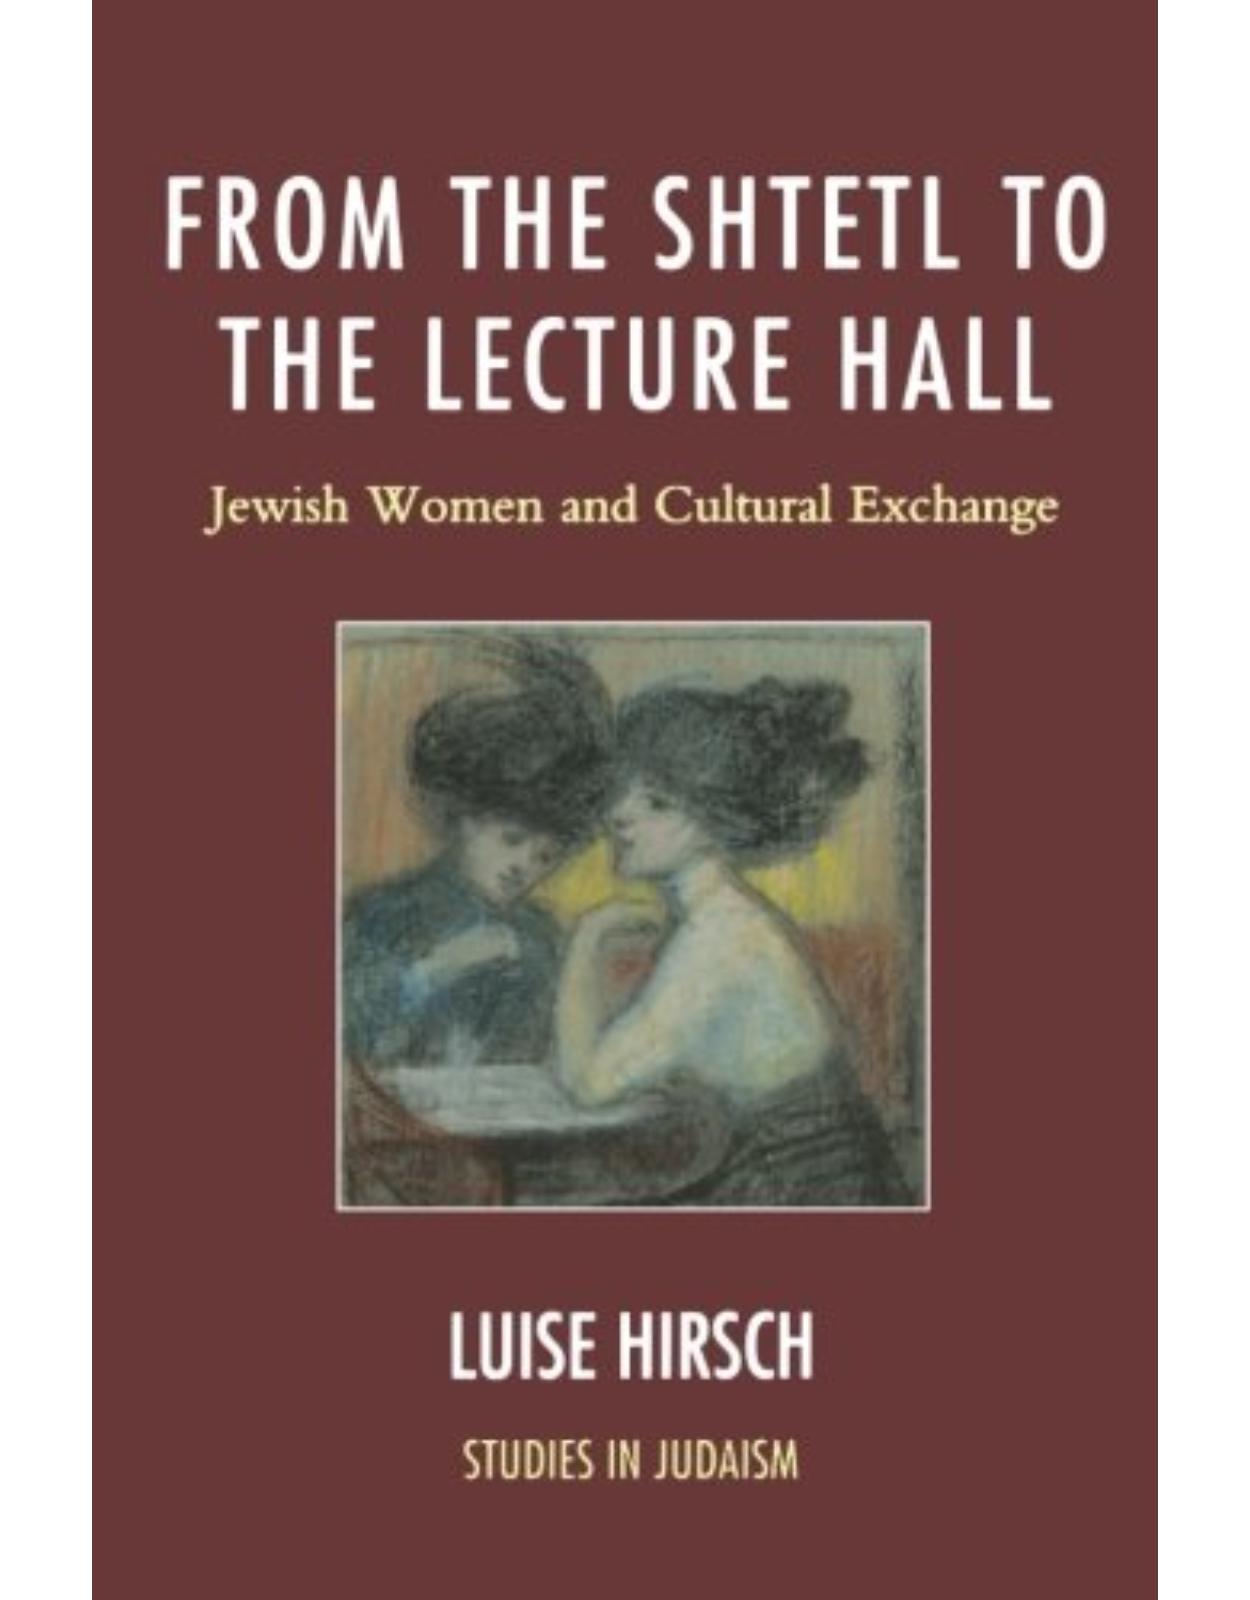 From the Shtetl to the Lecture Hall: Jewish Women and Cultural Exchange